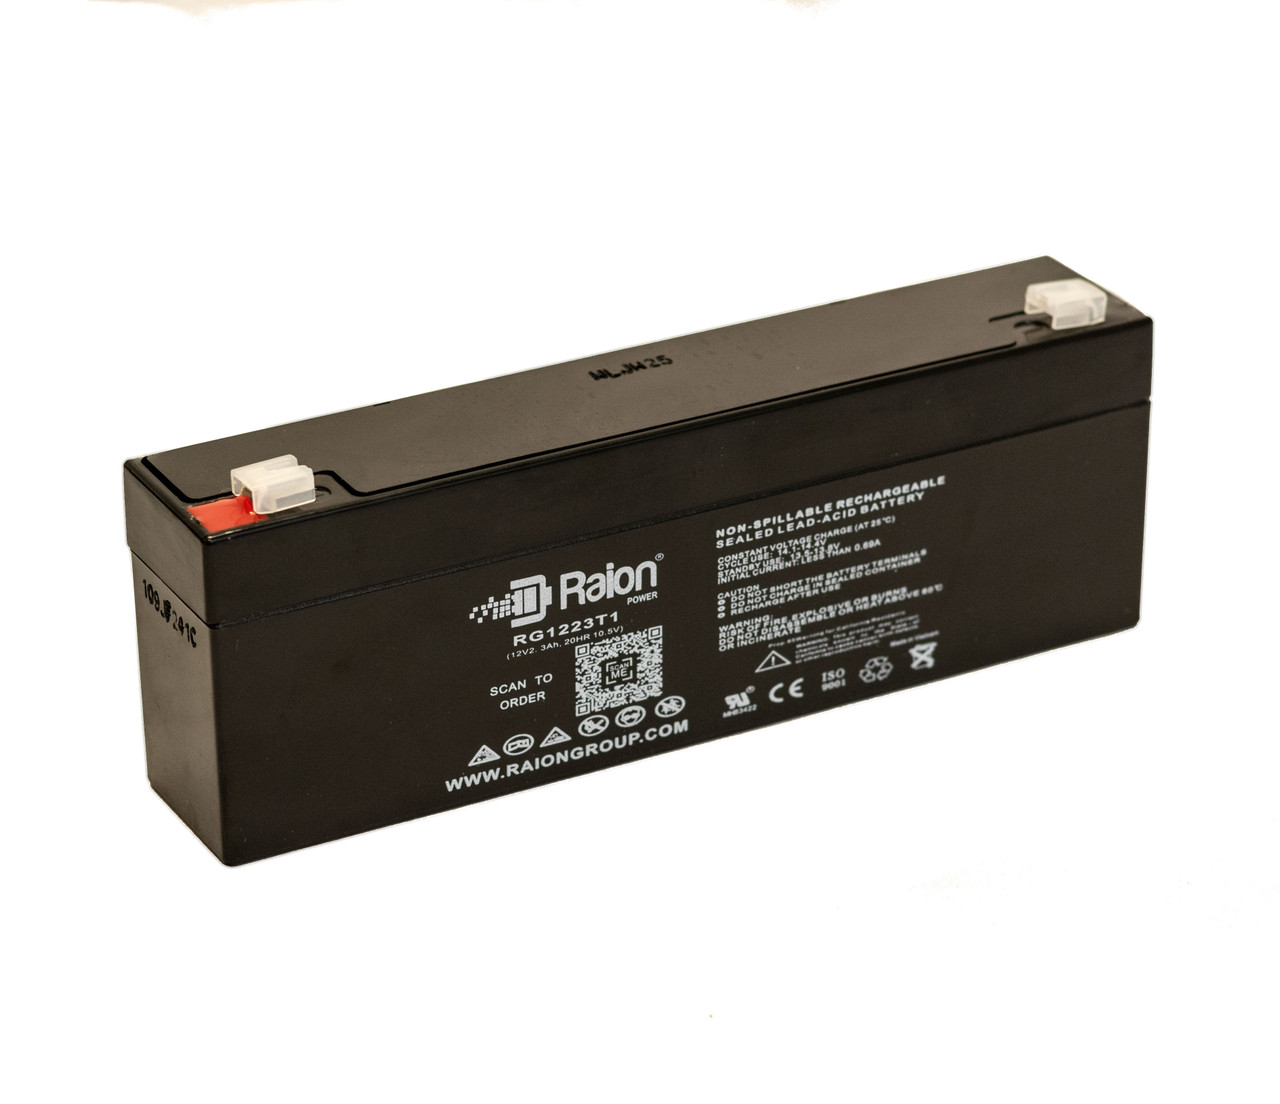 Raion Power RG1223T1 Replacement Battery for MK B00222